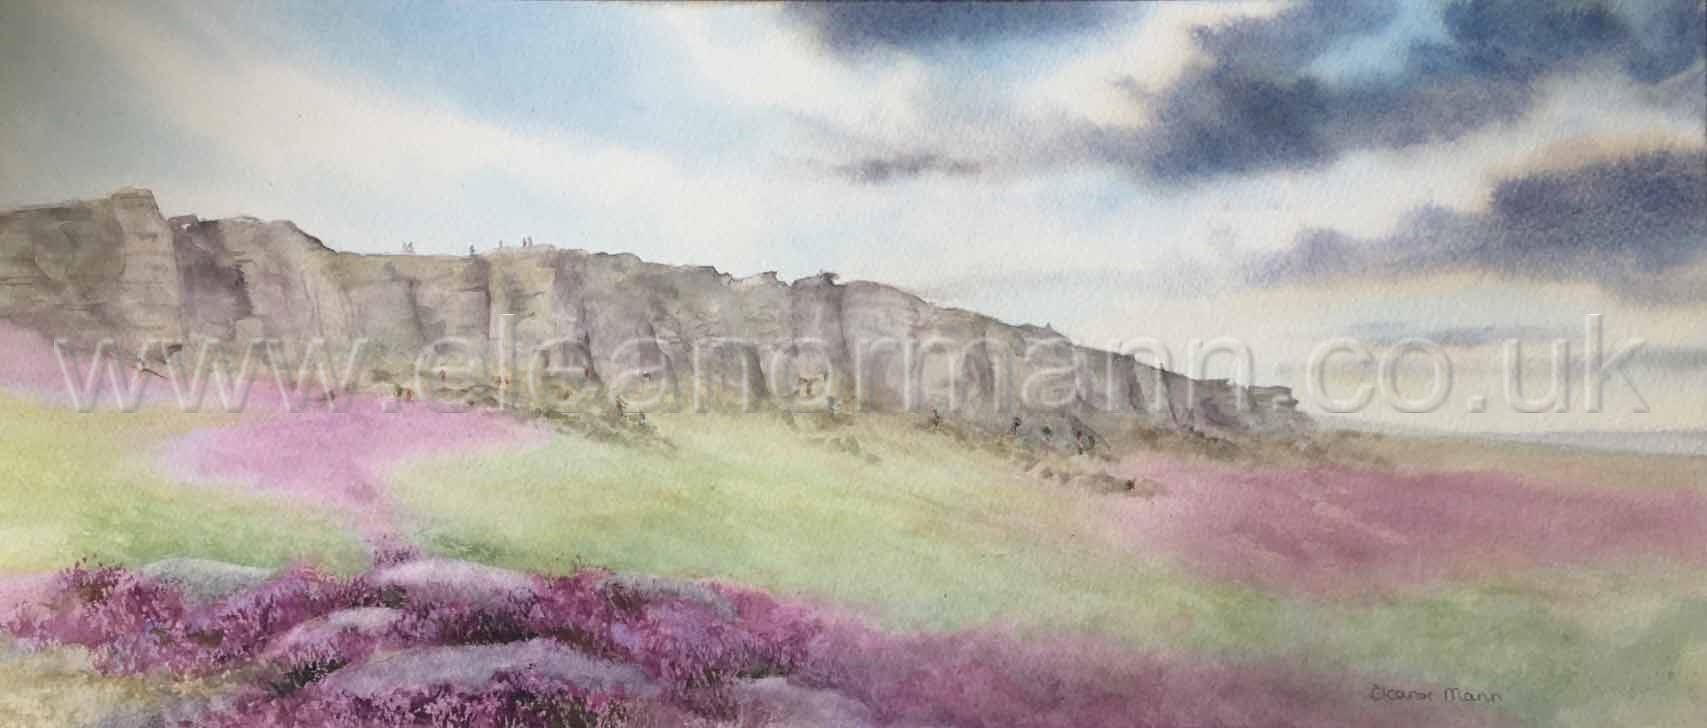 Original watercolour painting of Stanage Edge is a gritstone escarpment in the Peak District, England, famous as a location for climbing. It lies a couple of miles to the north of Hathersage, and the northern part of the edge forms the border between the High Peak of Derbyshire and Sheffield in South Yorkshire.